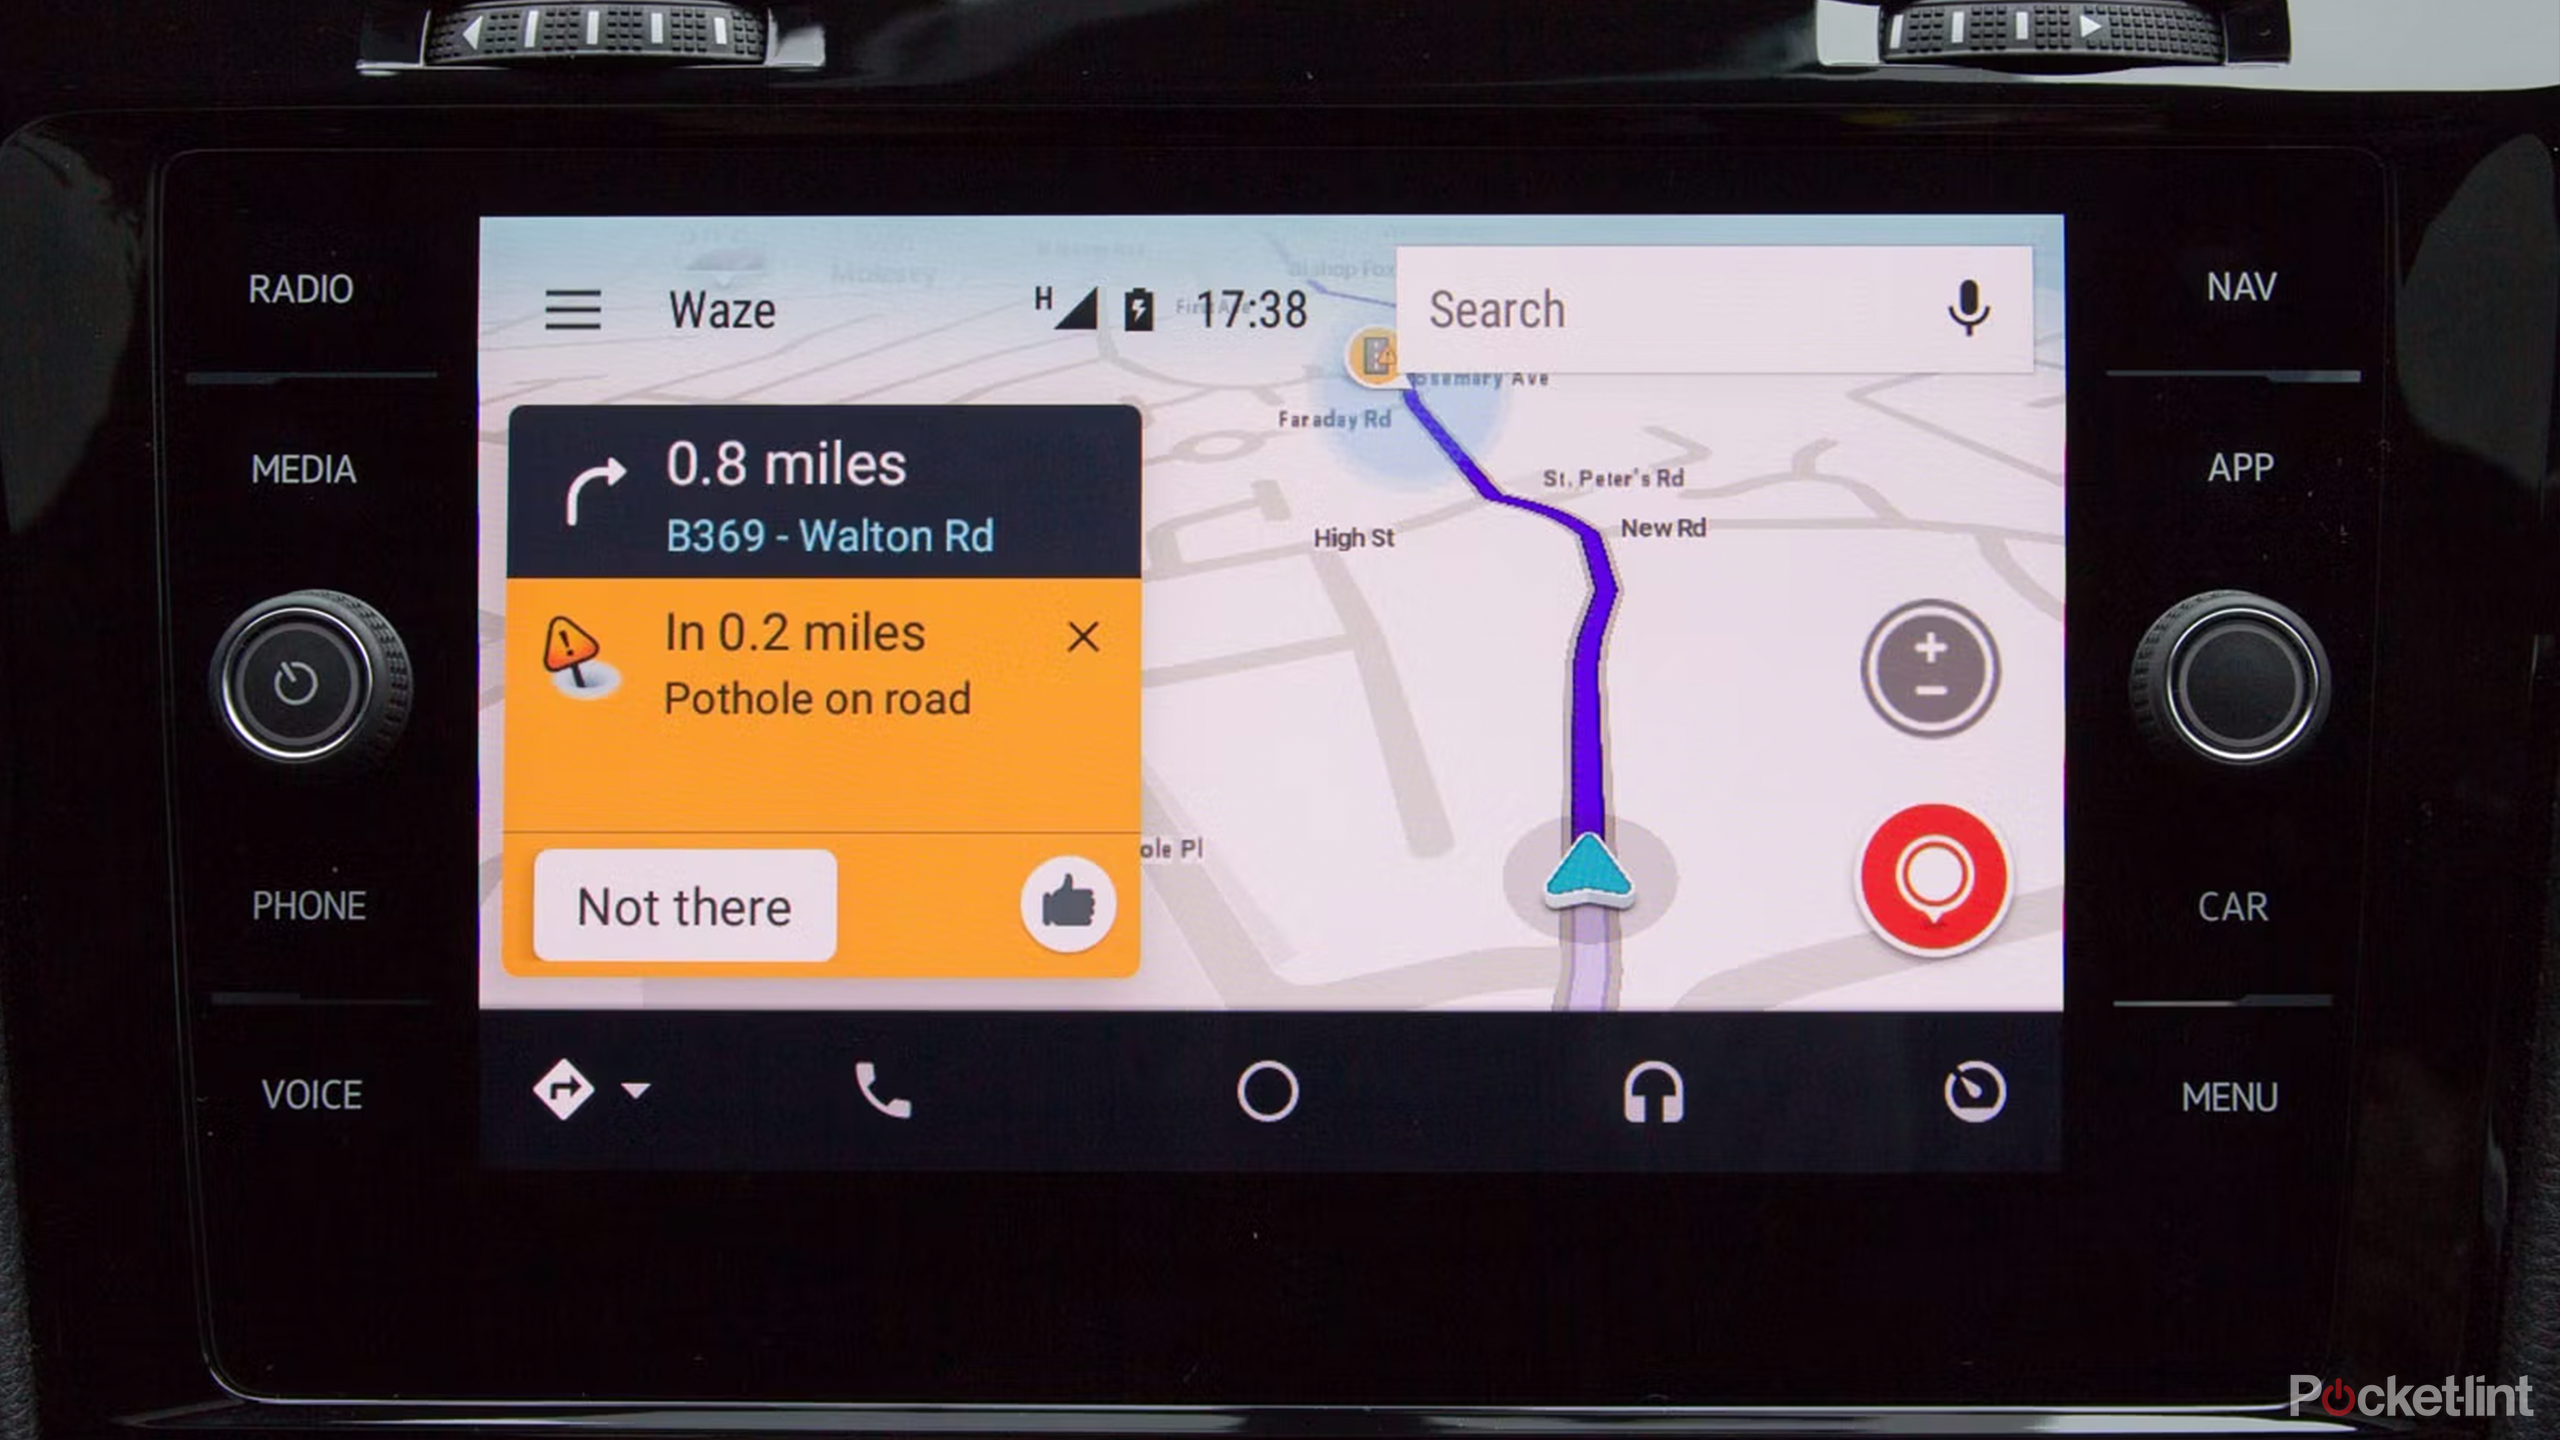 Waze running on your car's display